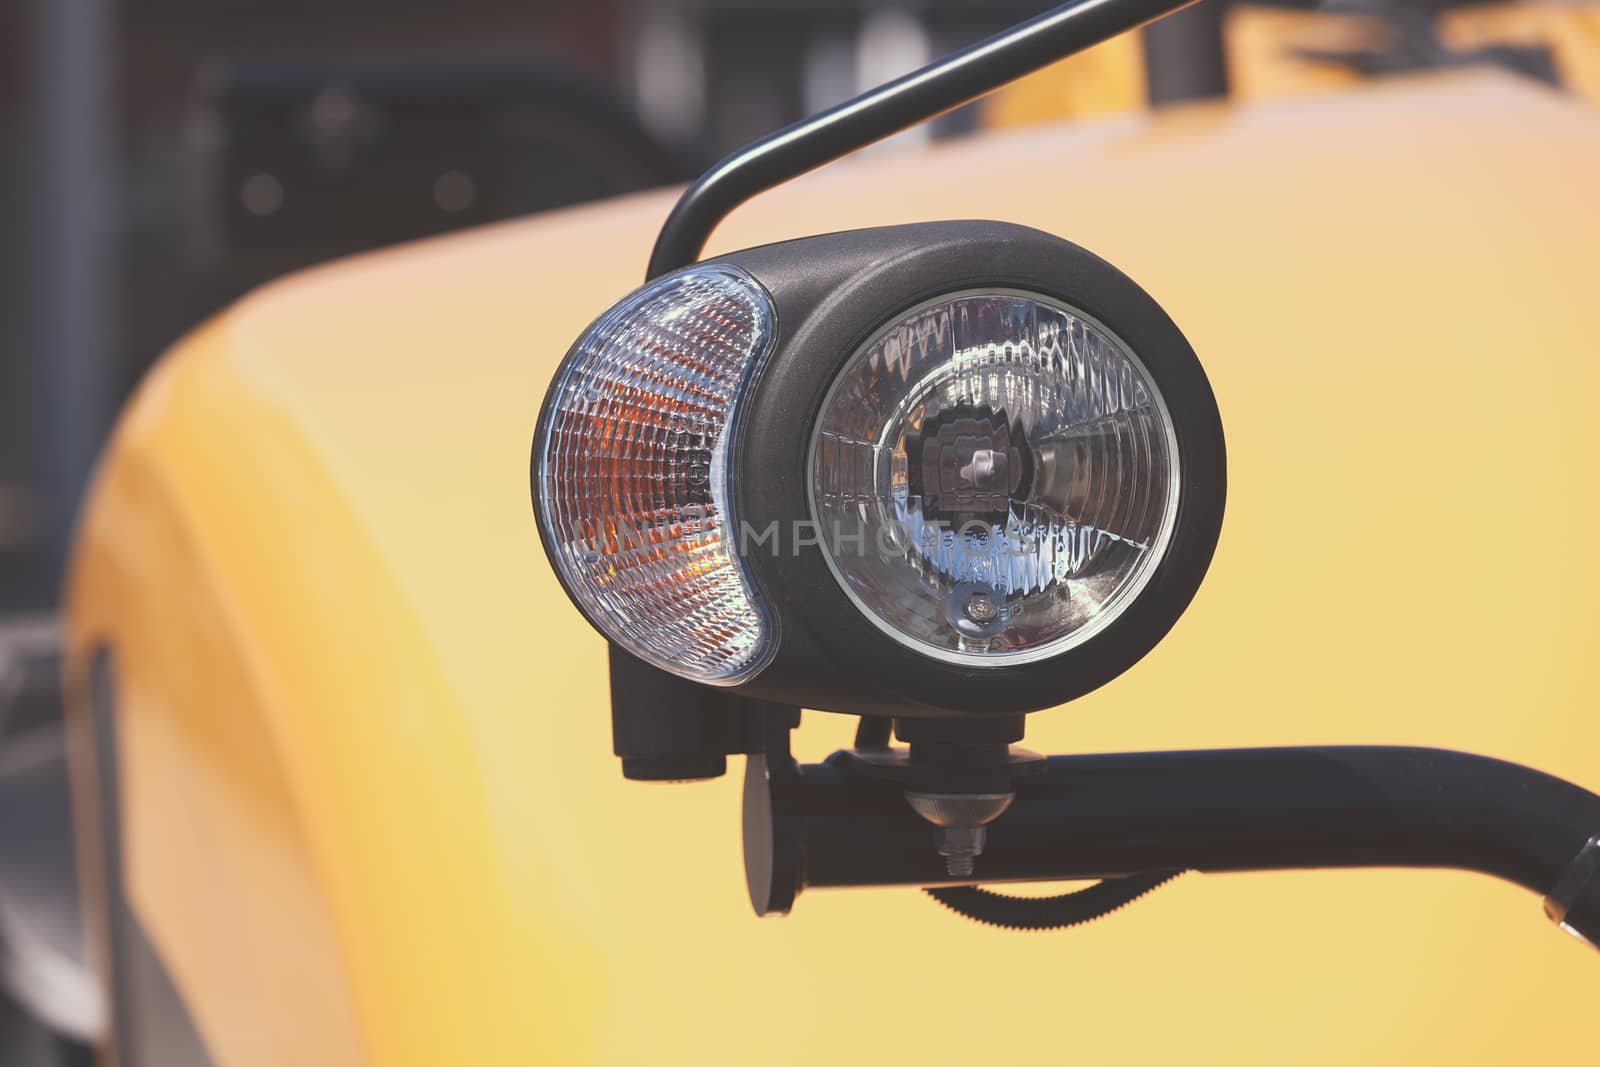 type headlights of the machine, note shallow depth of field